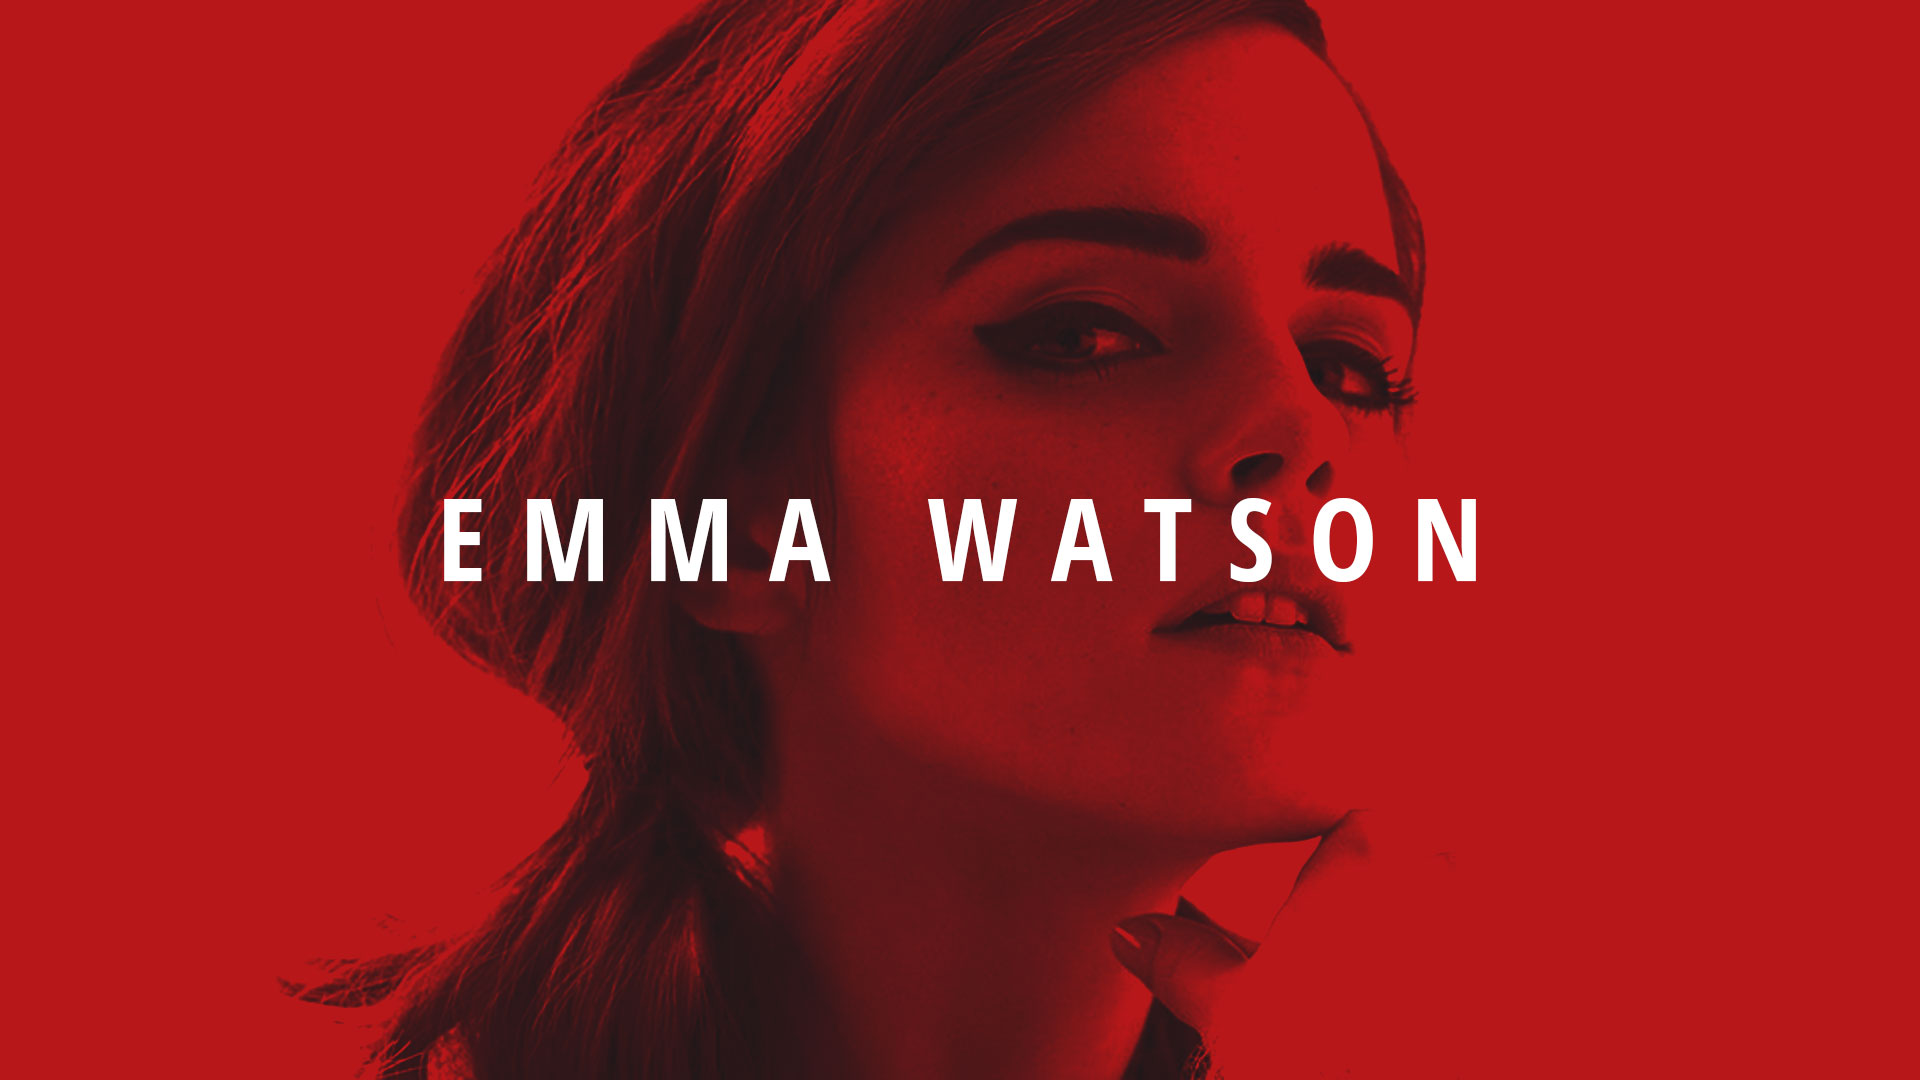 People 1920x1080 Emma Watson red actress women face red background portrait British women closeup simple background typography